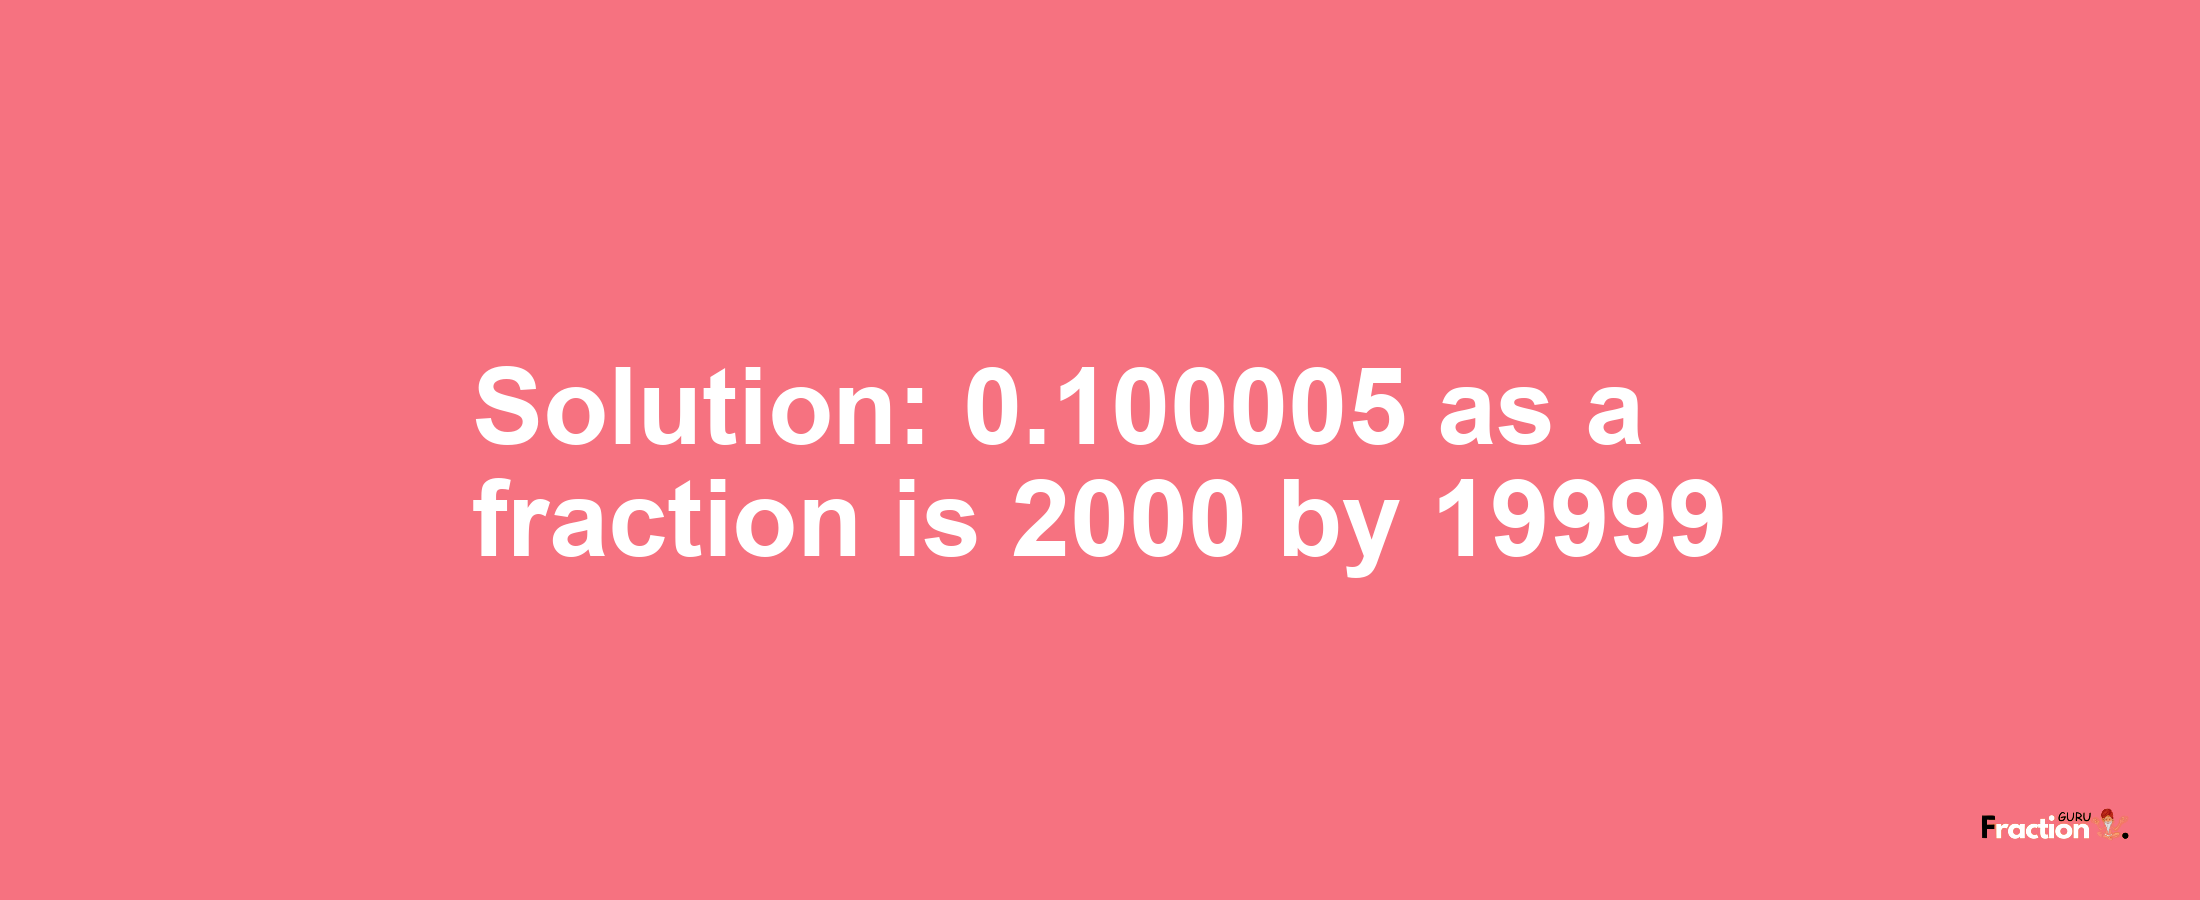 Solution:0.100005 as a fraction is 2000/19999